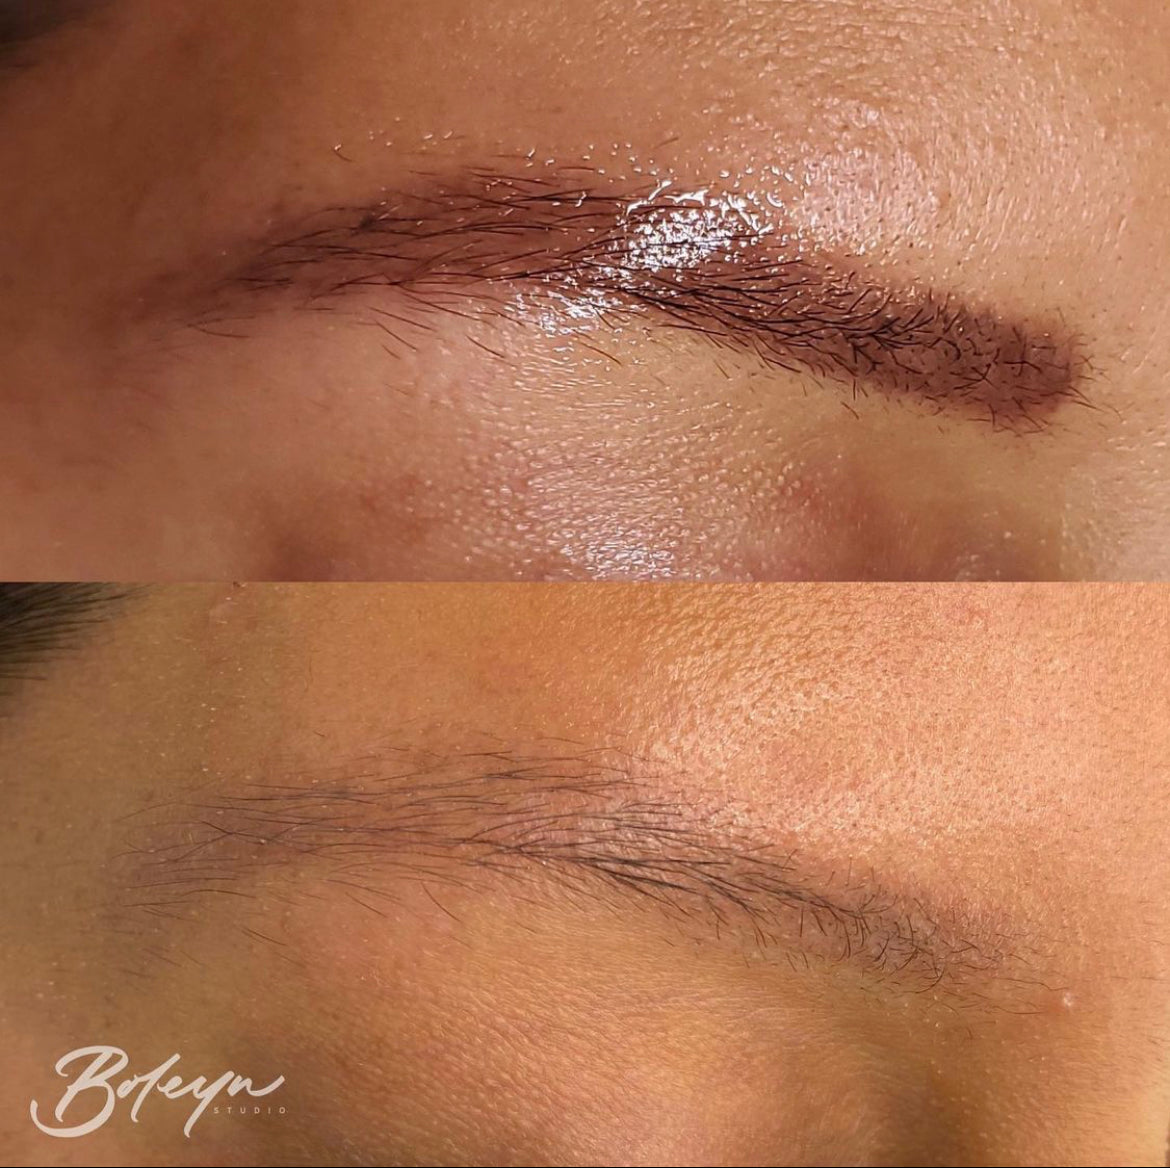 Tattoo/Microblading removal (Deposit) - Package of 4